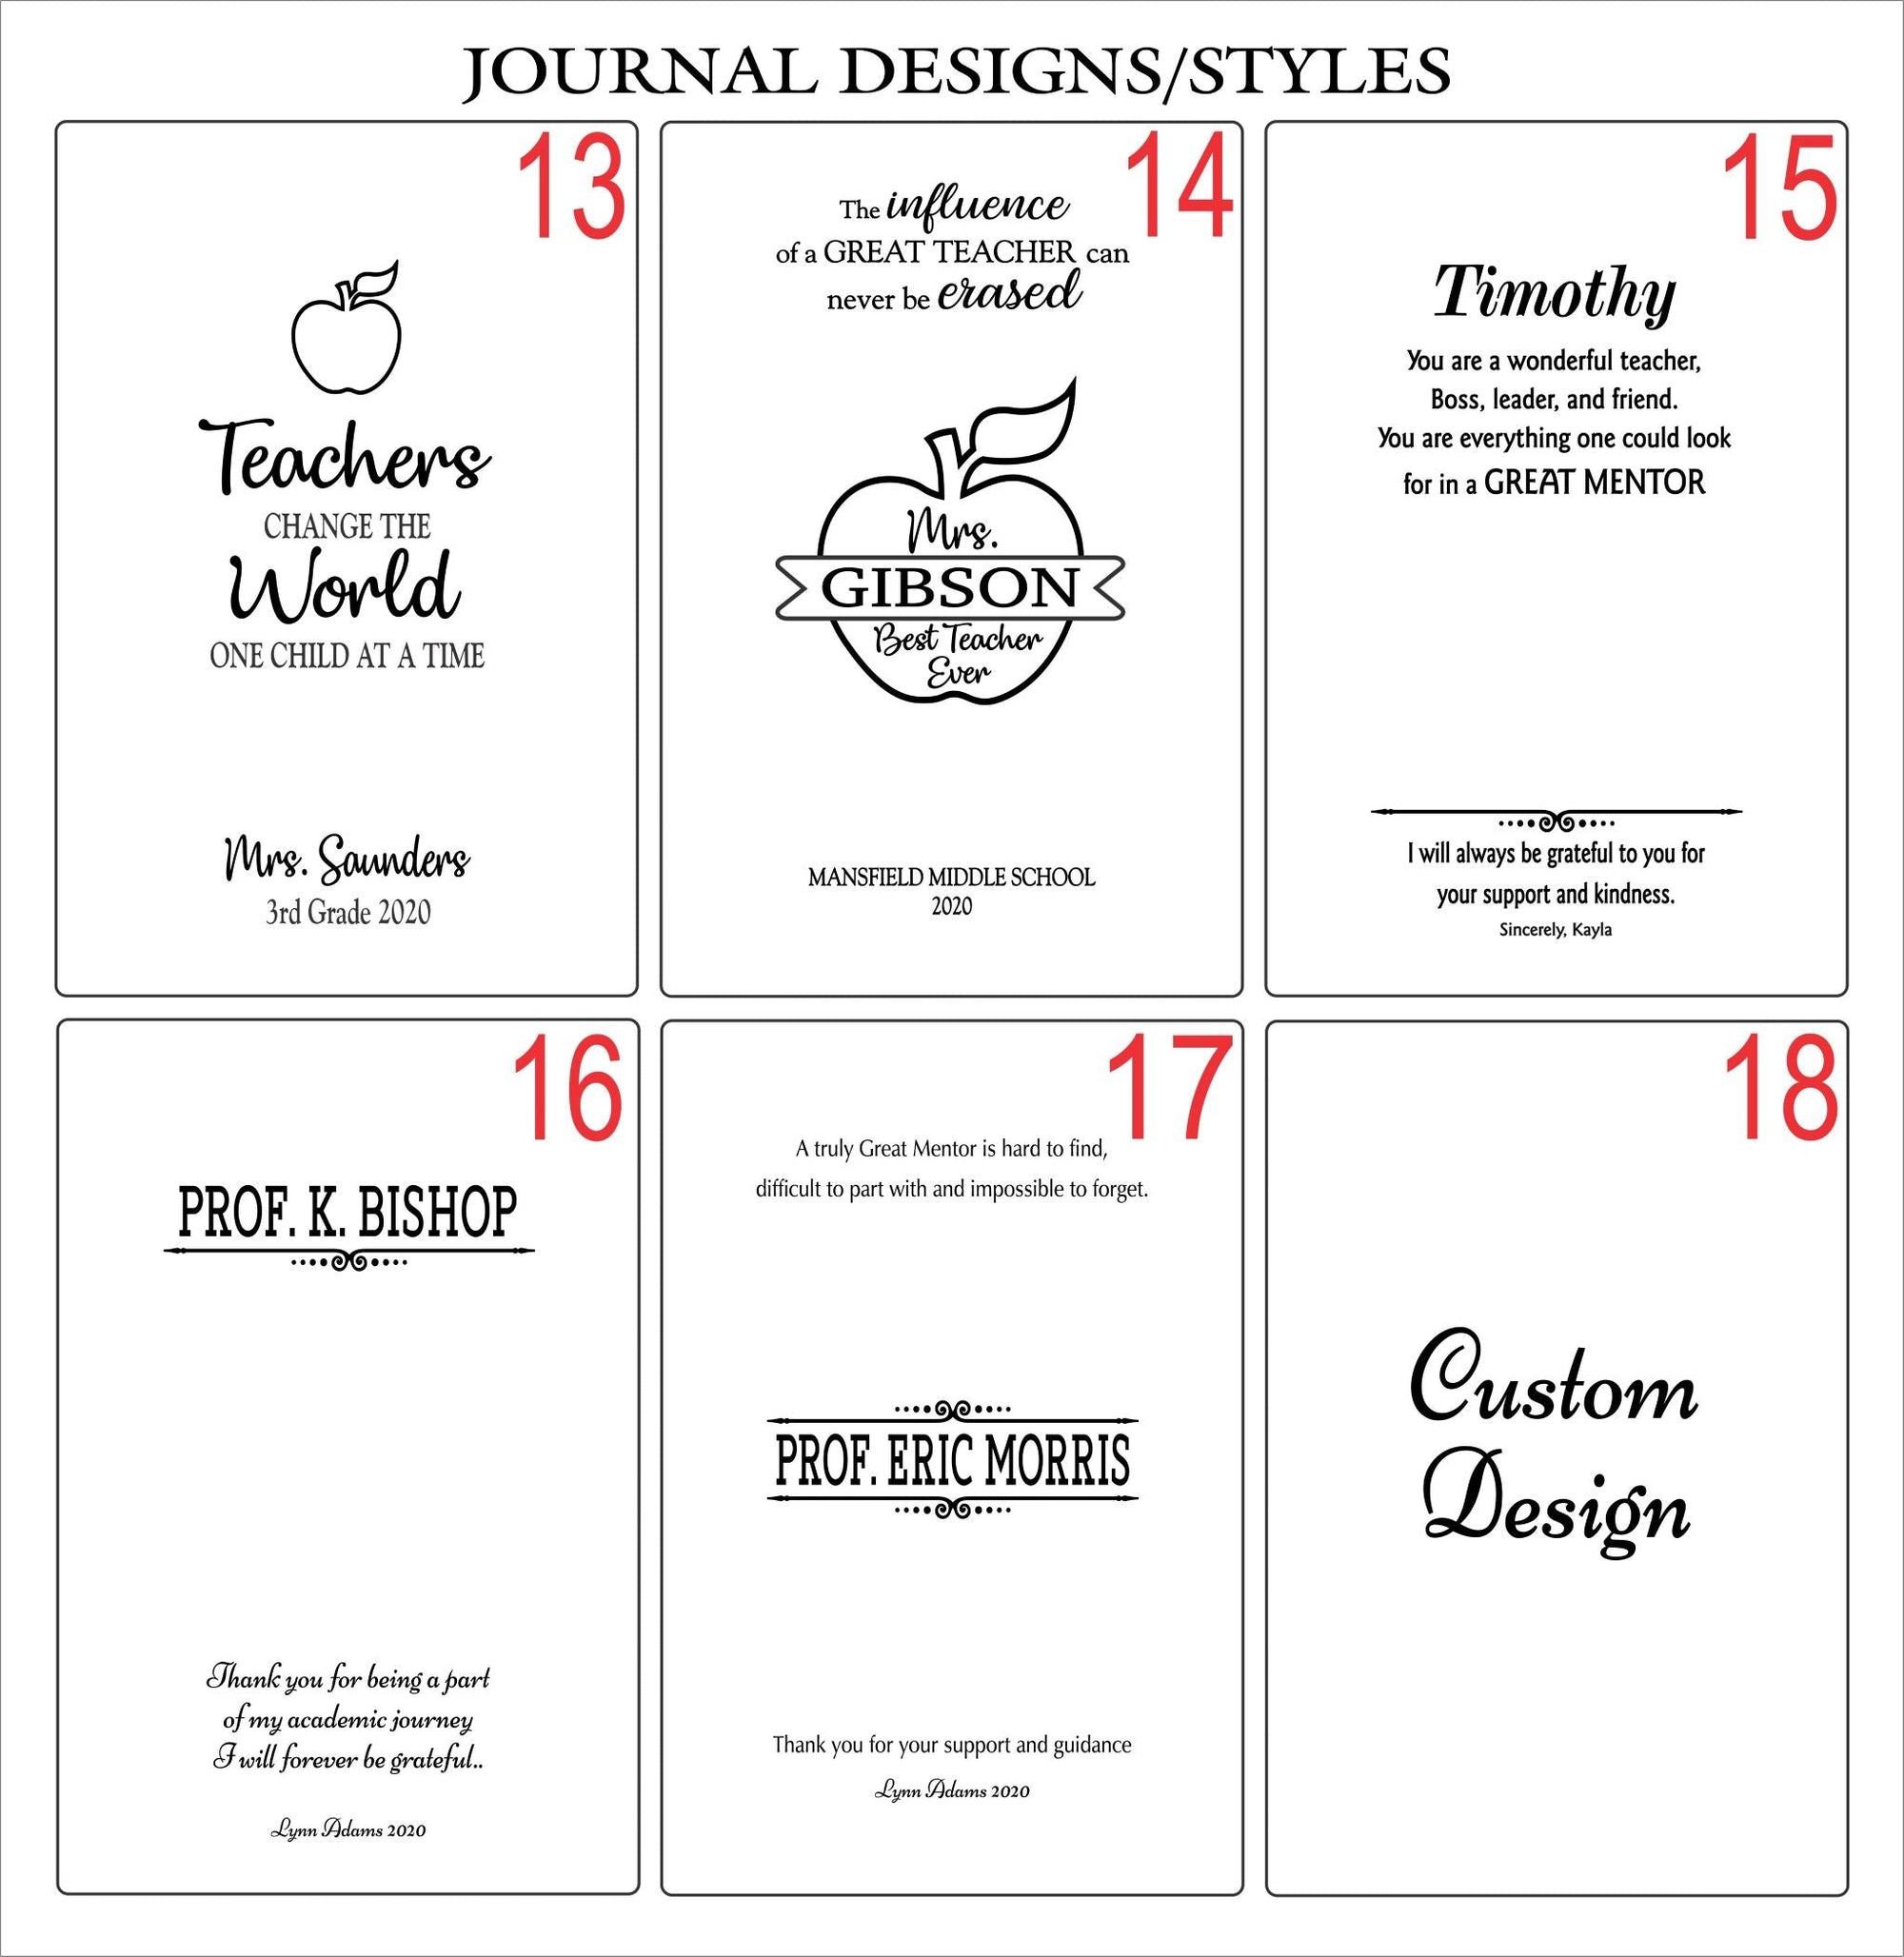 Personalized Gifts for Teachers | Custom Journal Notebook